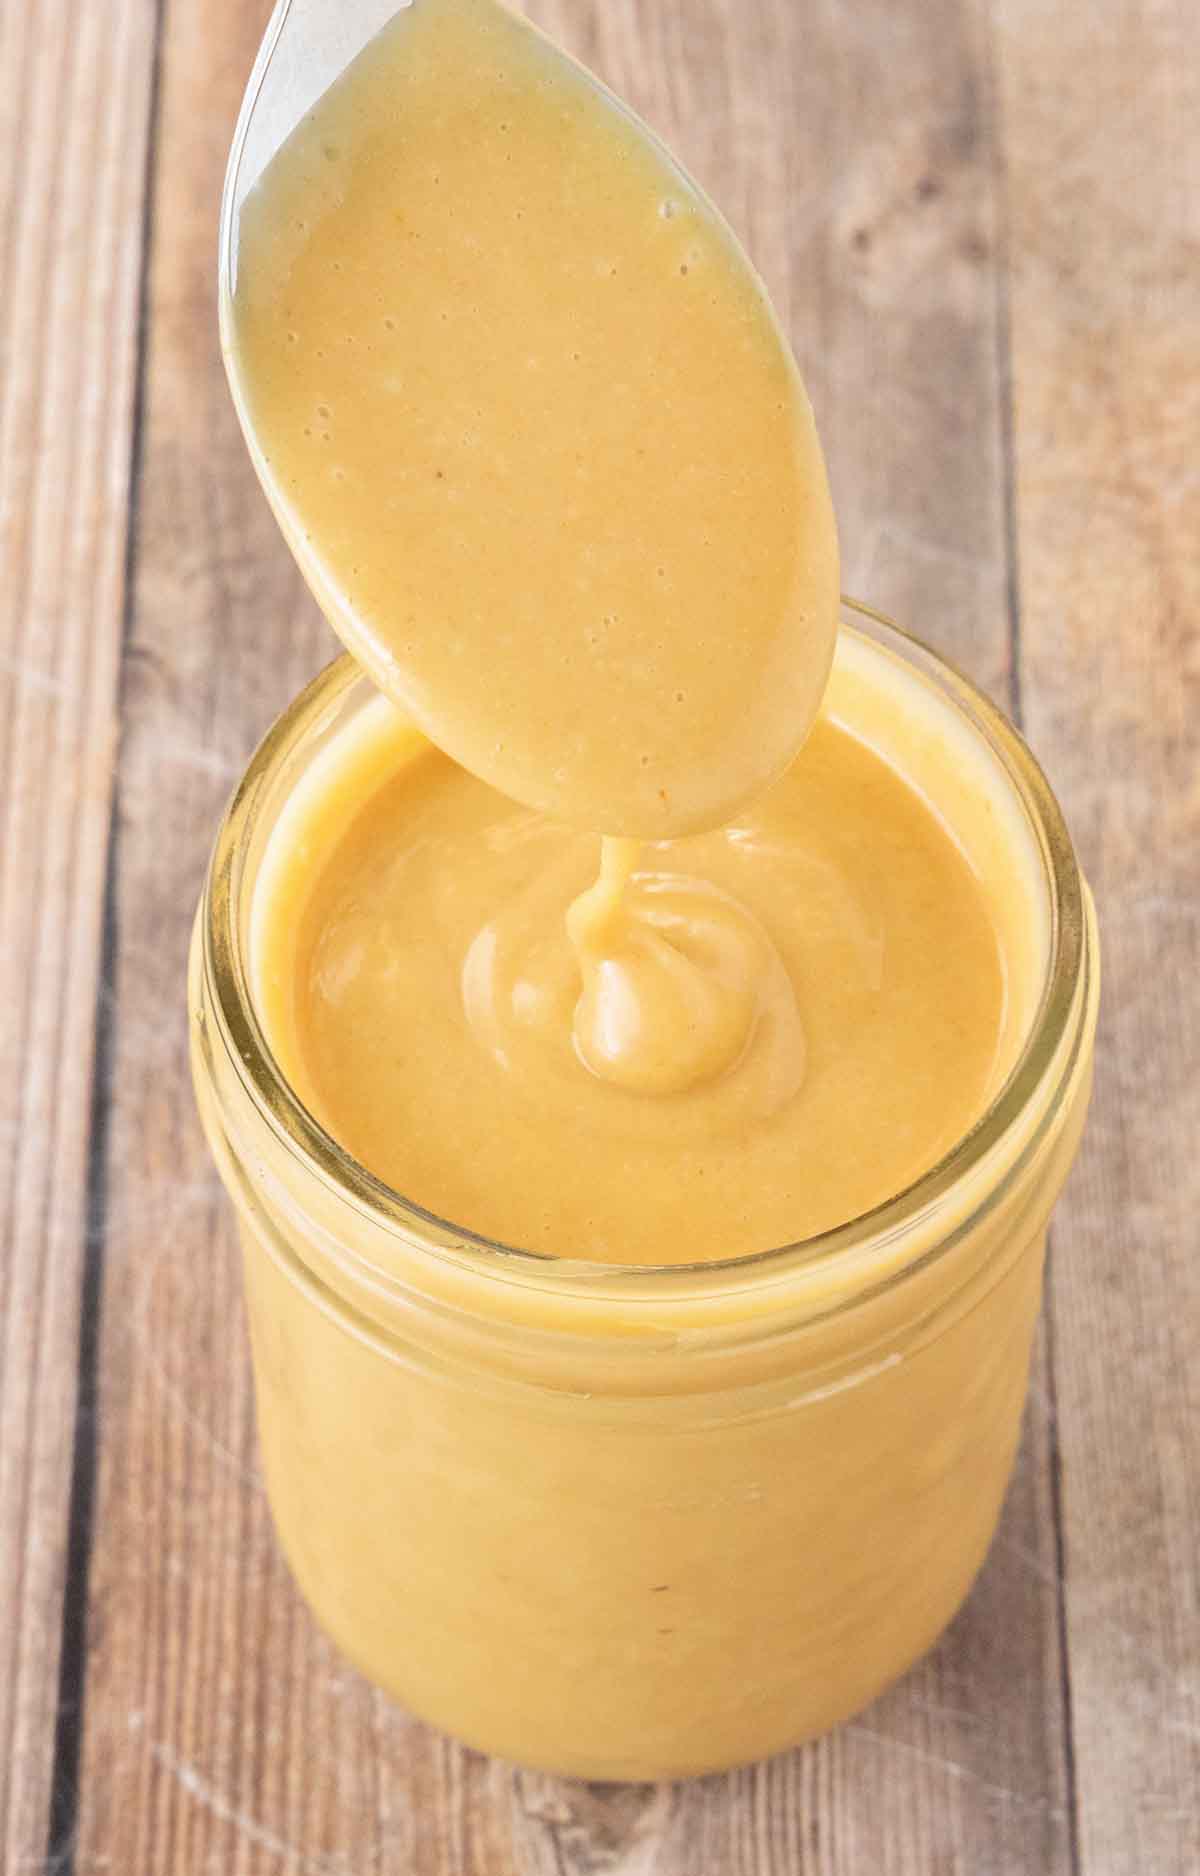 Chick-fil-A sauce in glass jar with a spoon of sauce coming out.